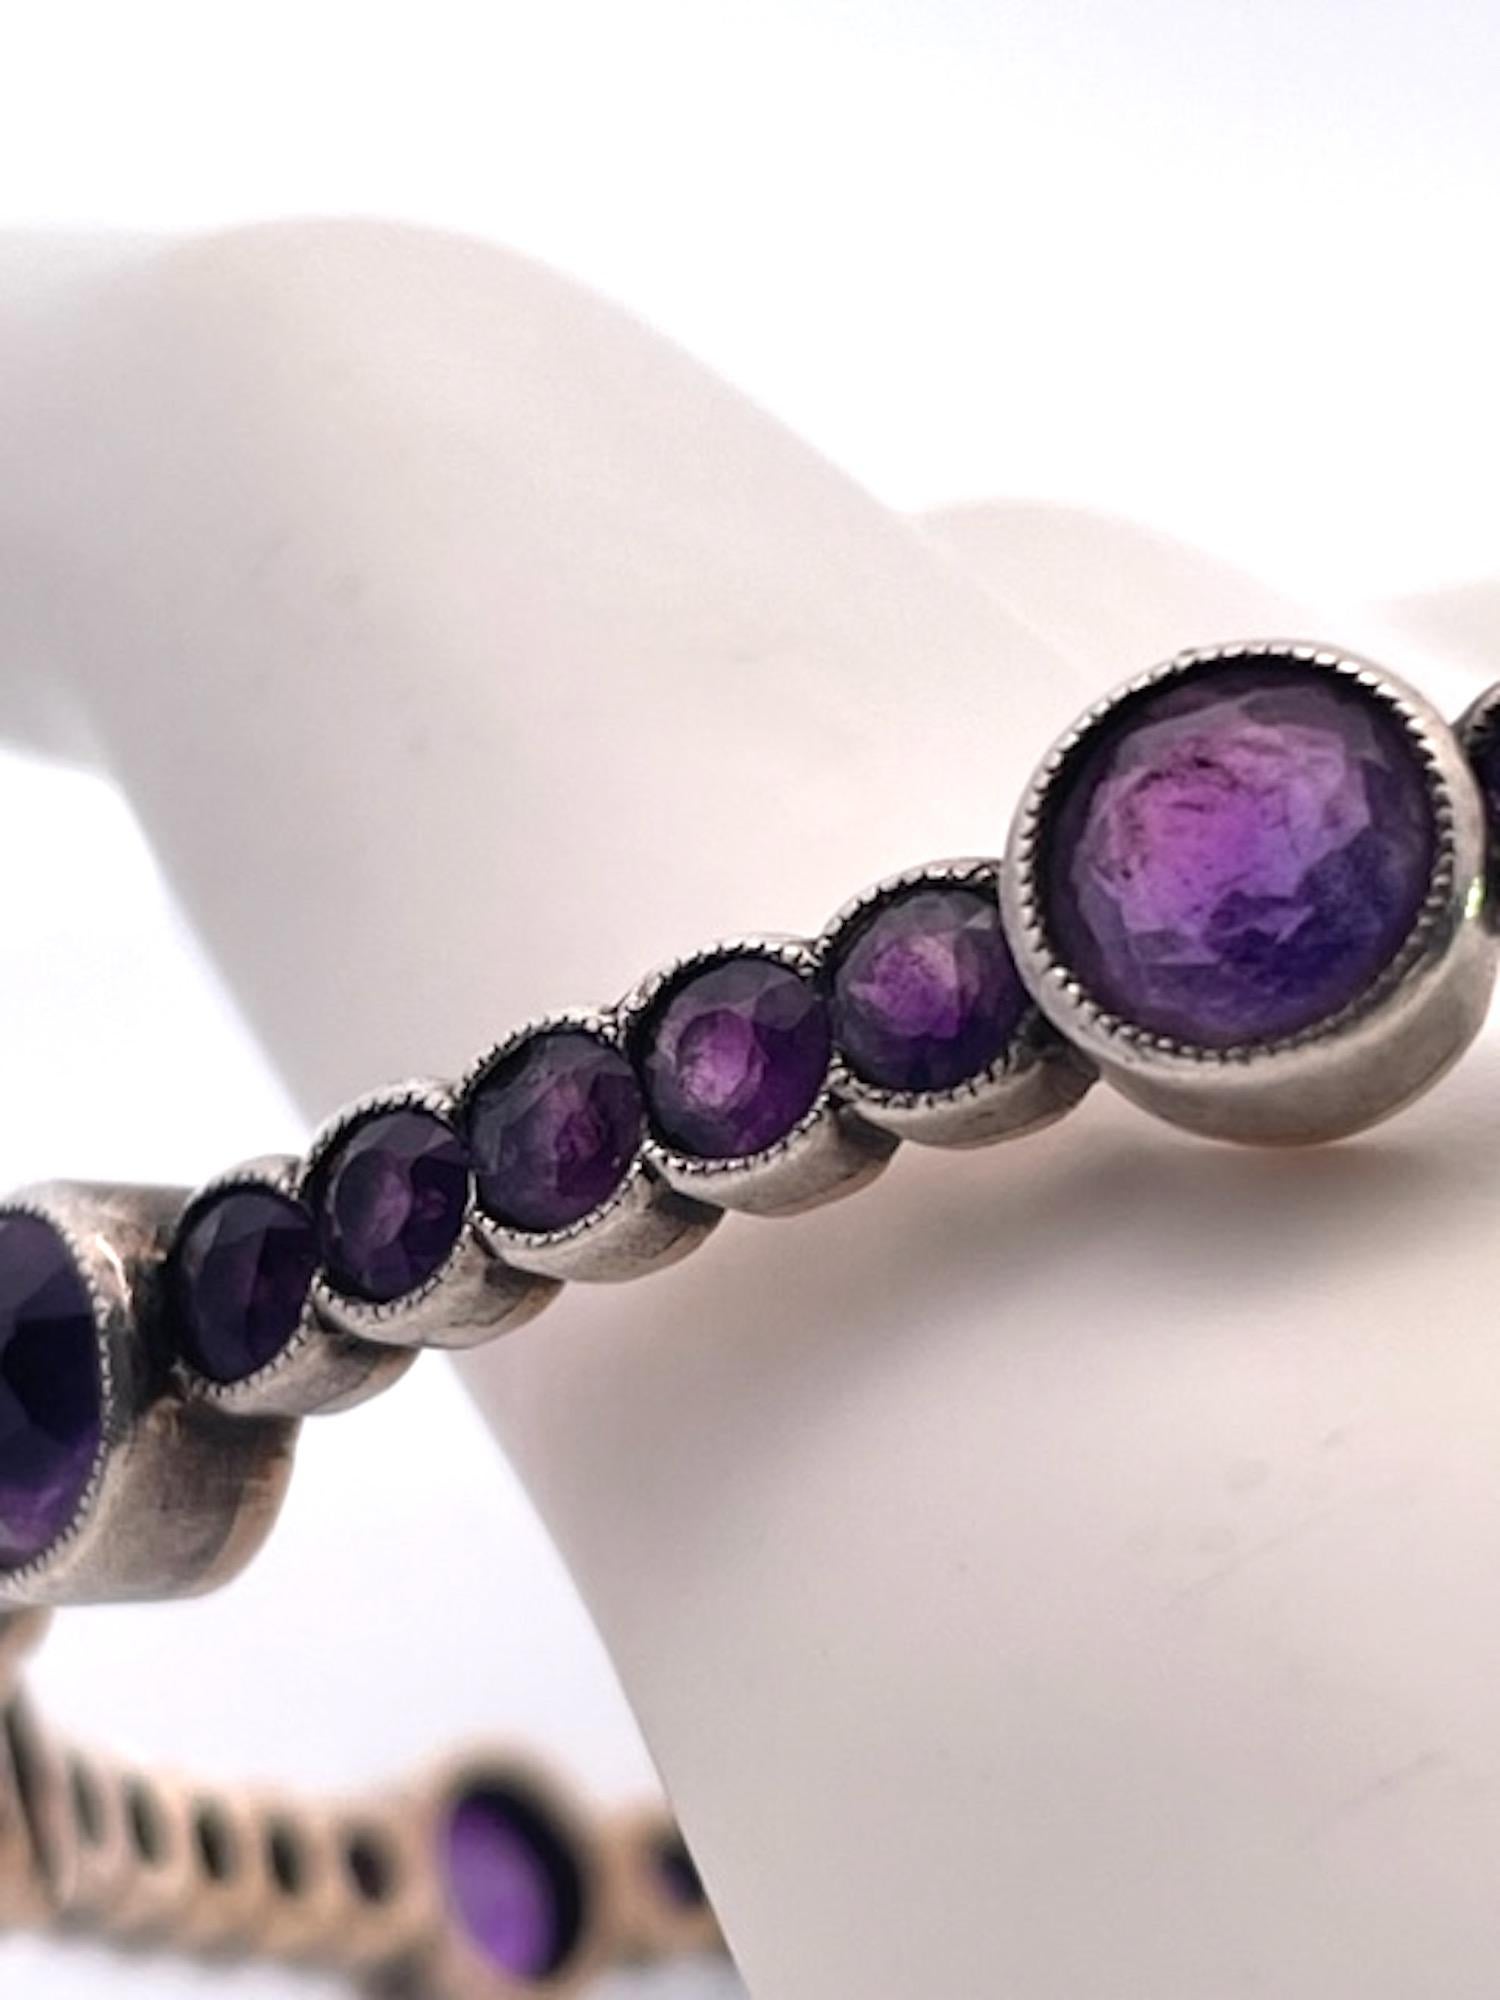 This Amethyst bangle bracelet is rare as we seldom find these bracelets surviving.  This is beautiful as it alternates between large Amethyst and smaller ones throughout this bracelet.  There are 9 large Amethysts at 0.65 points and approximate